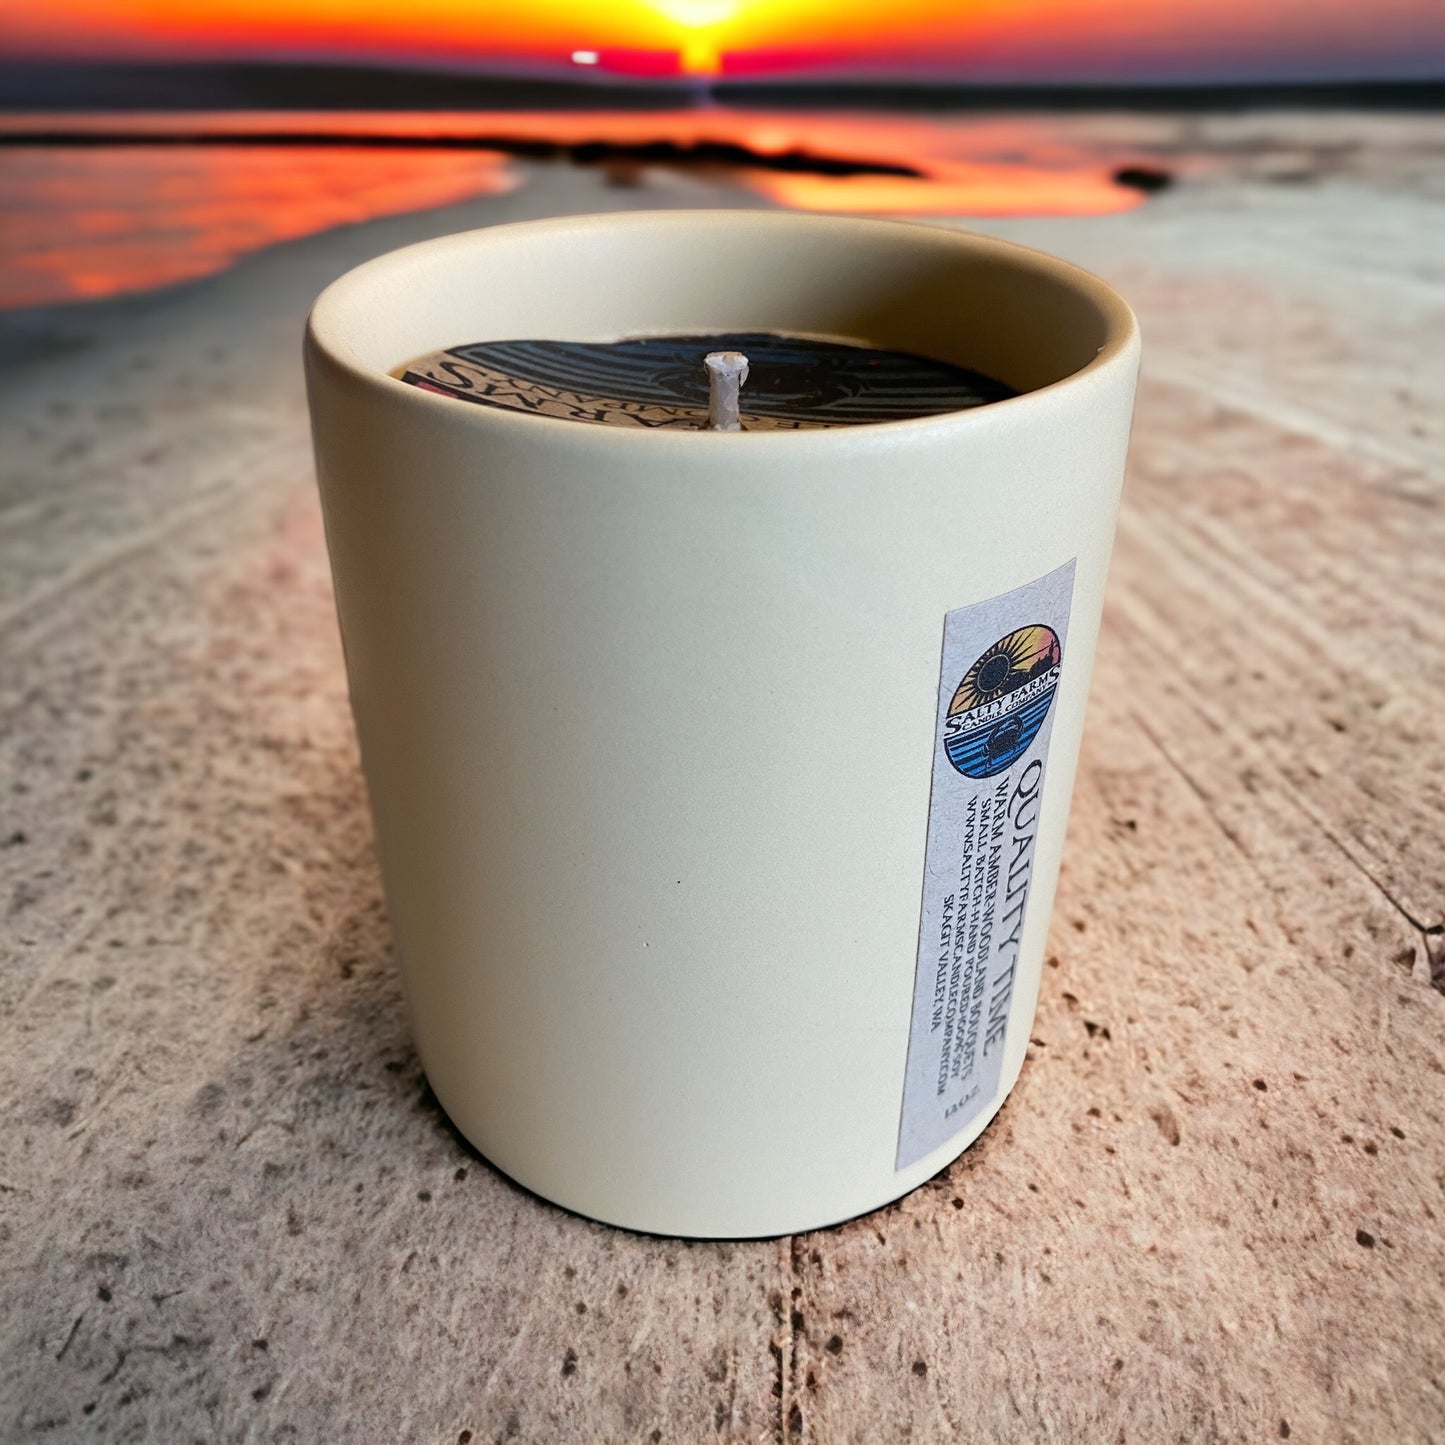 Quality time 12oz. Soy Candle